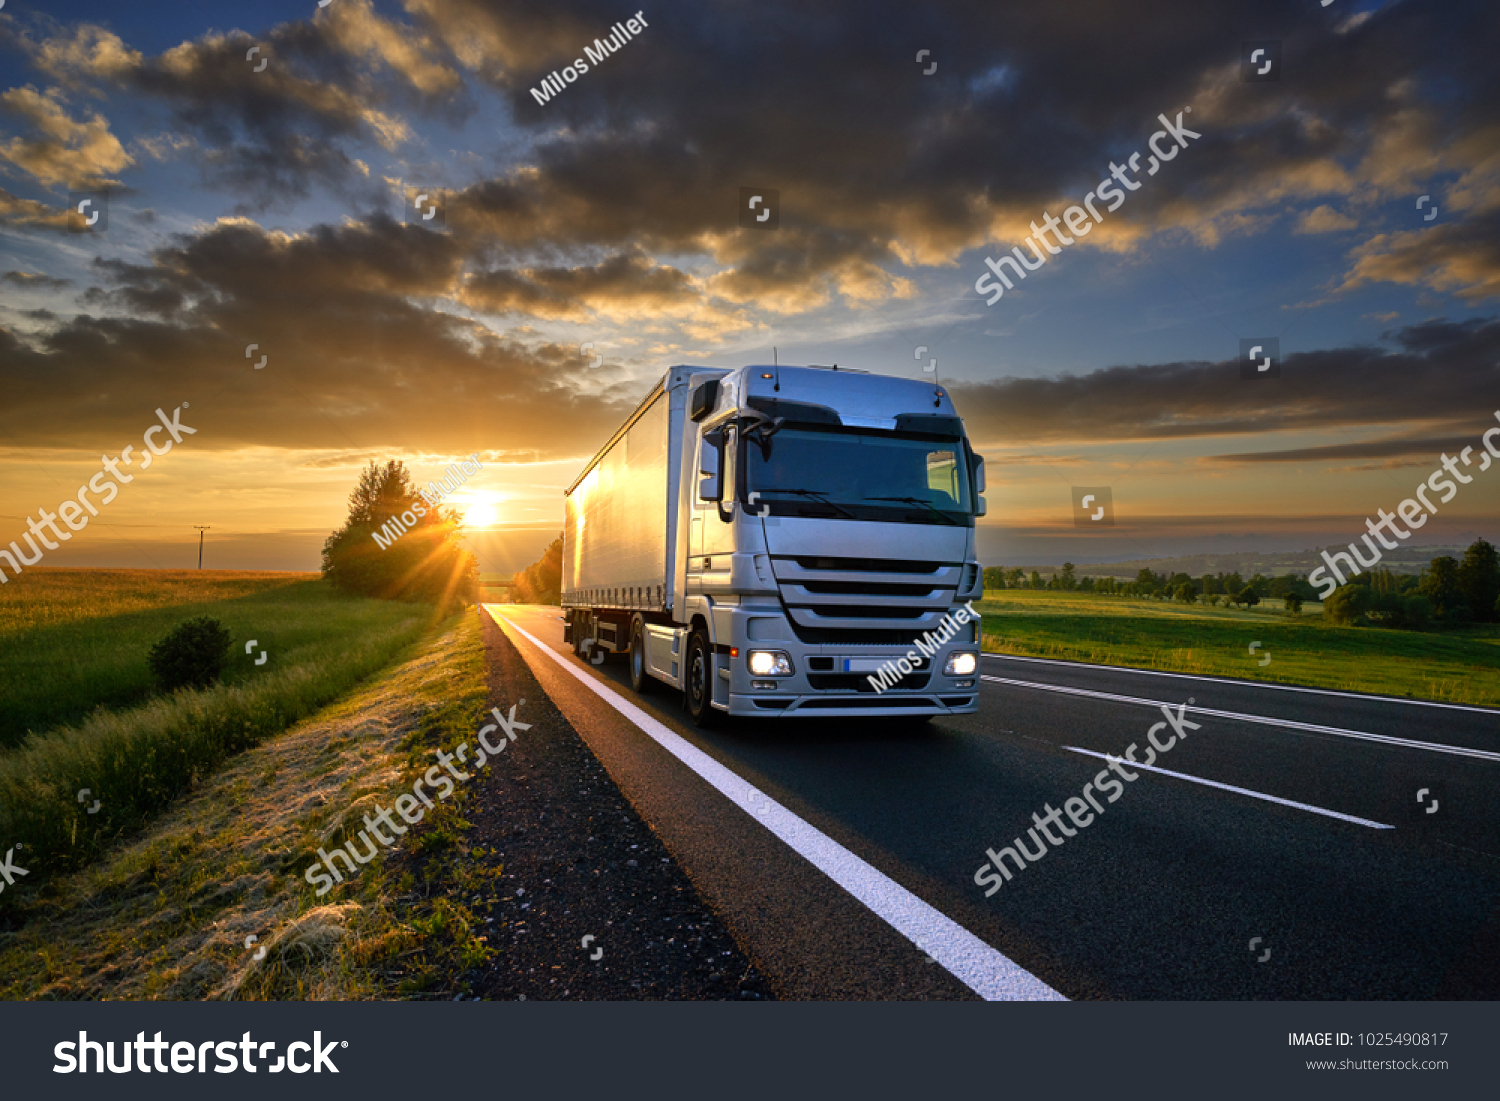 Truck driving on the asphalt road in rural landscape at sunset with dark clouds #1025490817